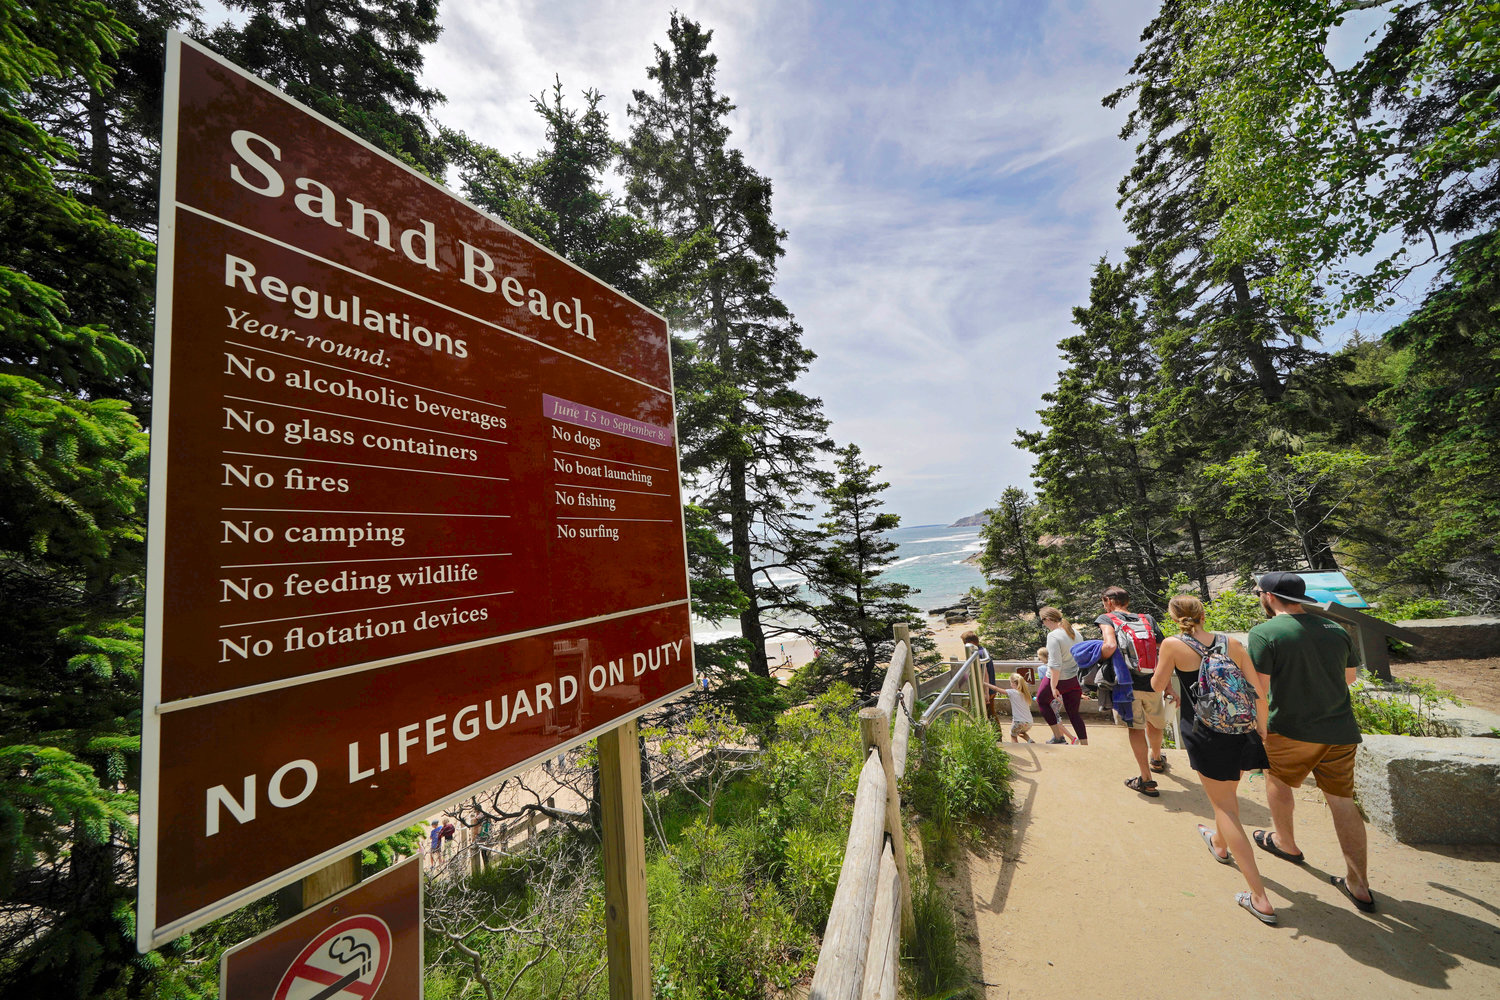 Beach-goers walk by a sign that warns of the absence of lifeguards at Sand Beach in Acadia National Park, Maine, on June 11.